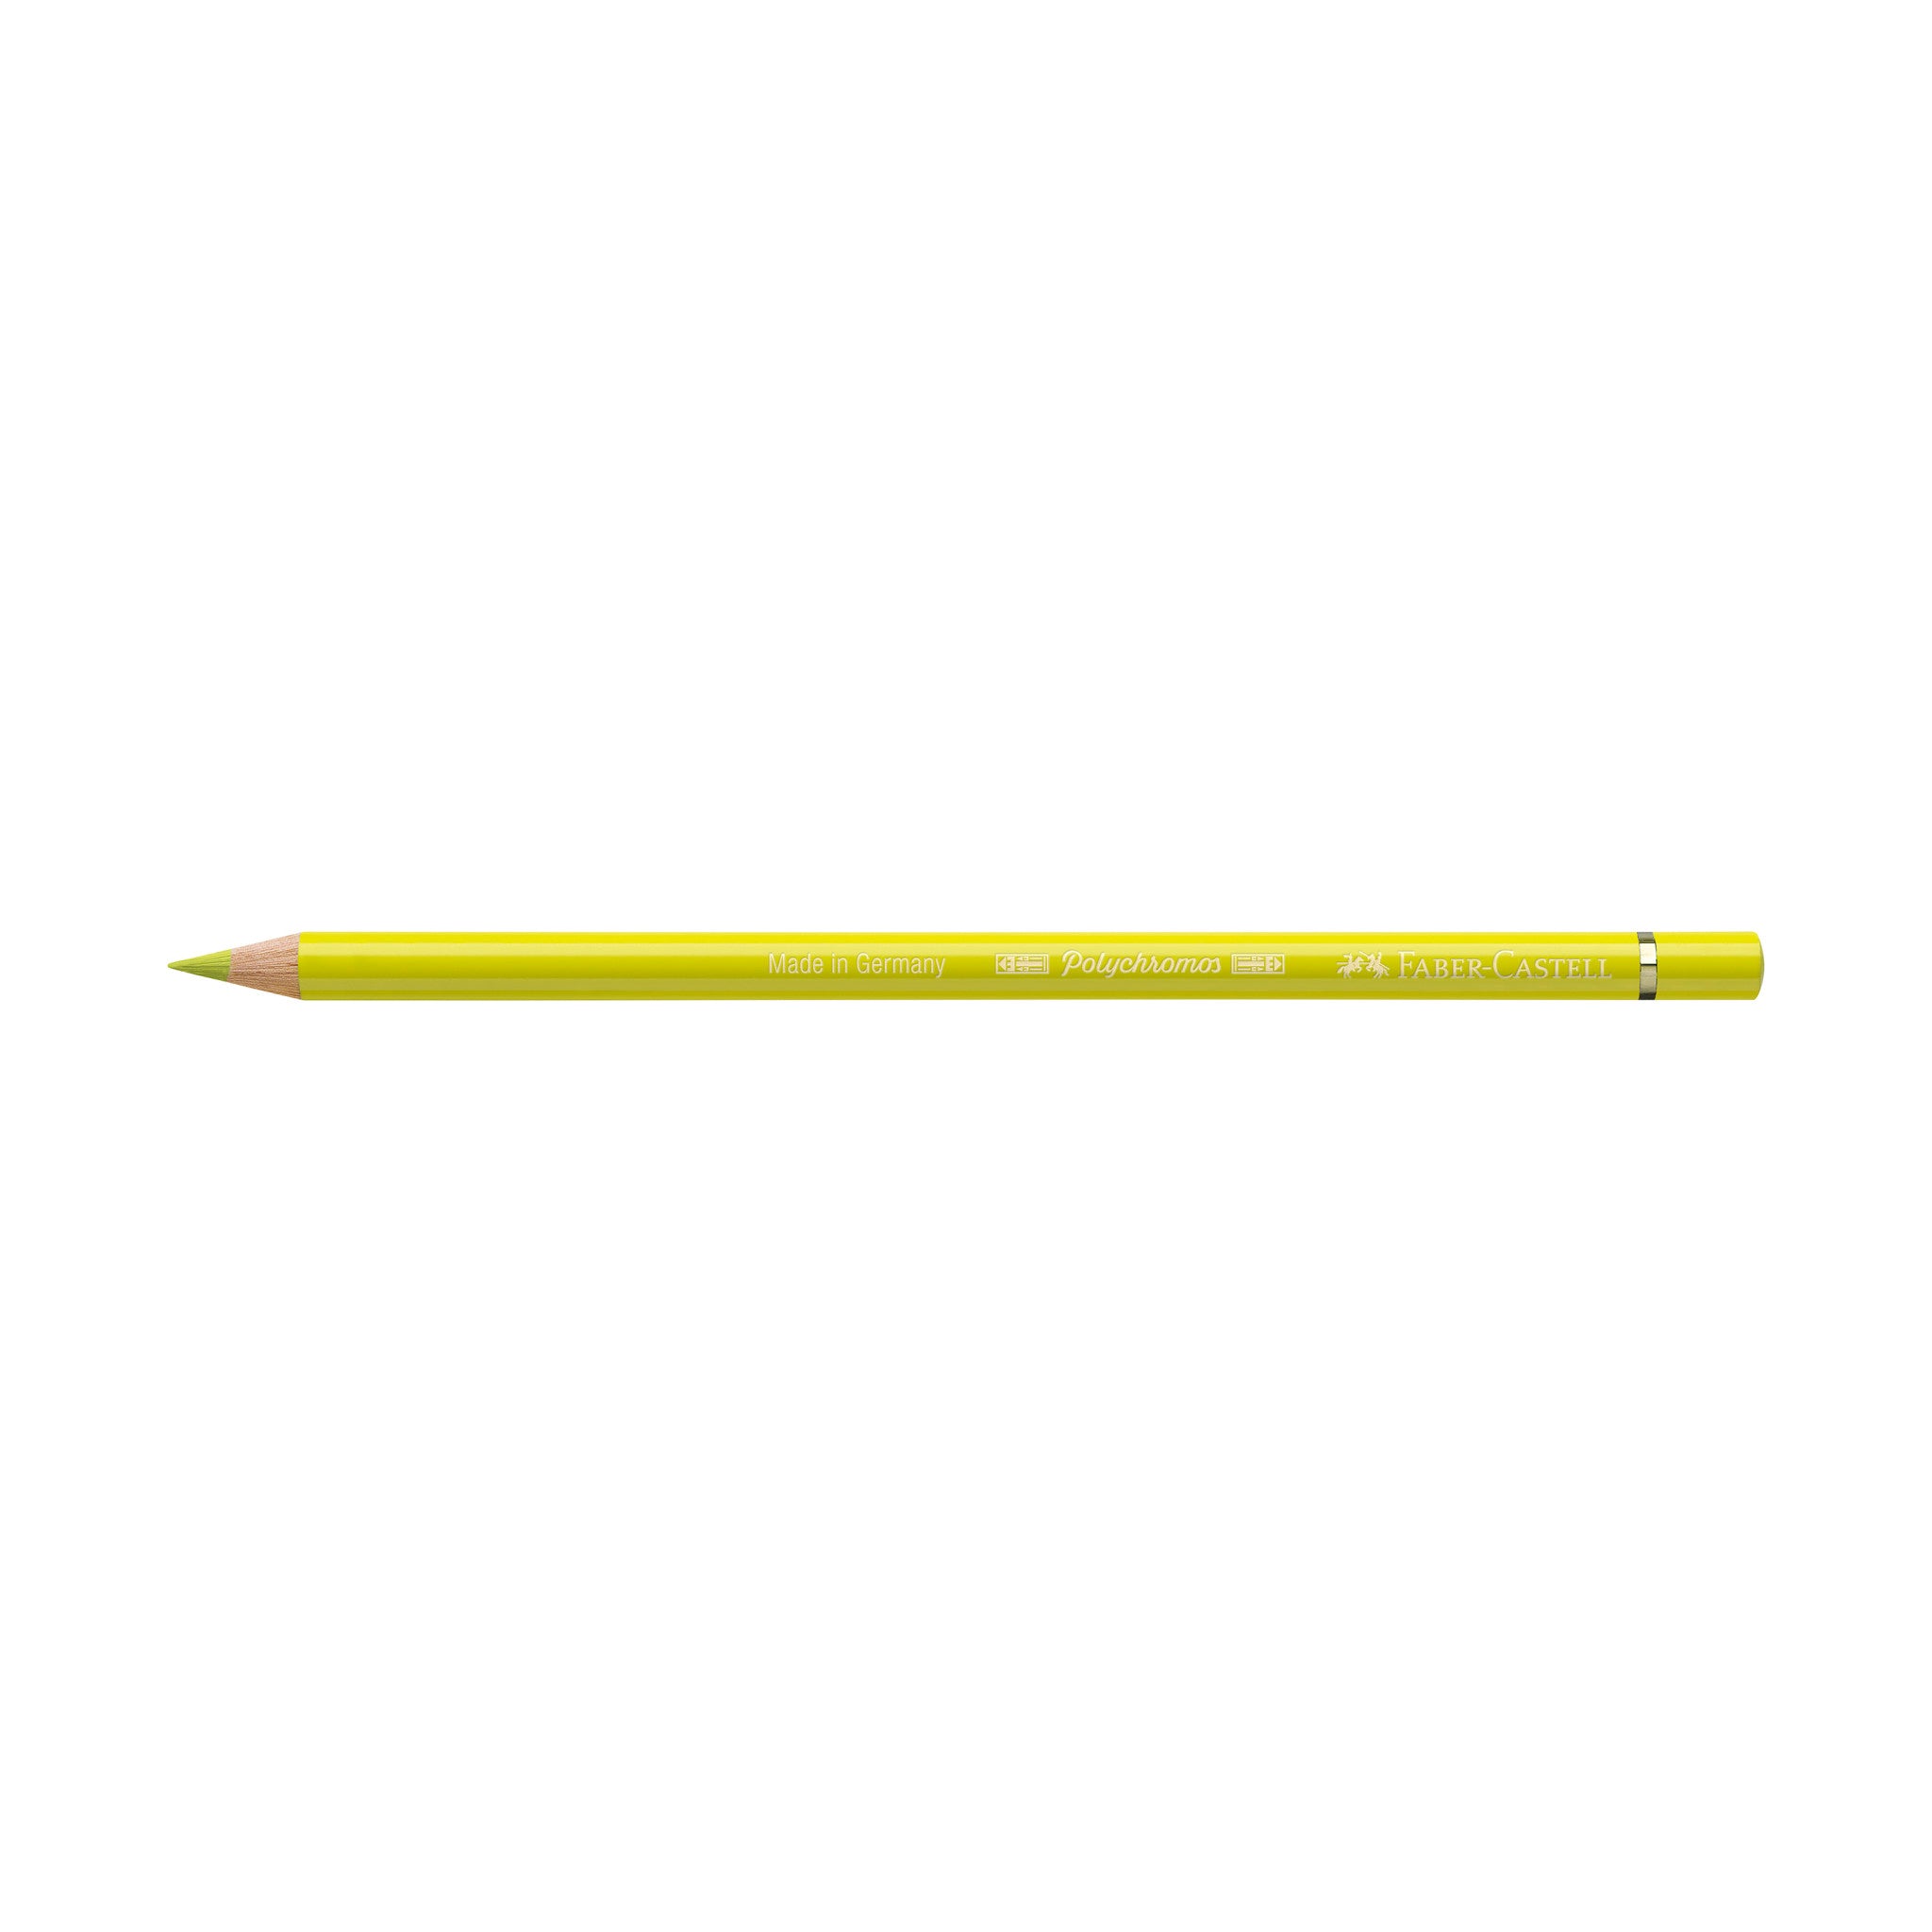 Faber Castell Polychromos Canary Yellow - RISD Store